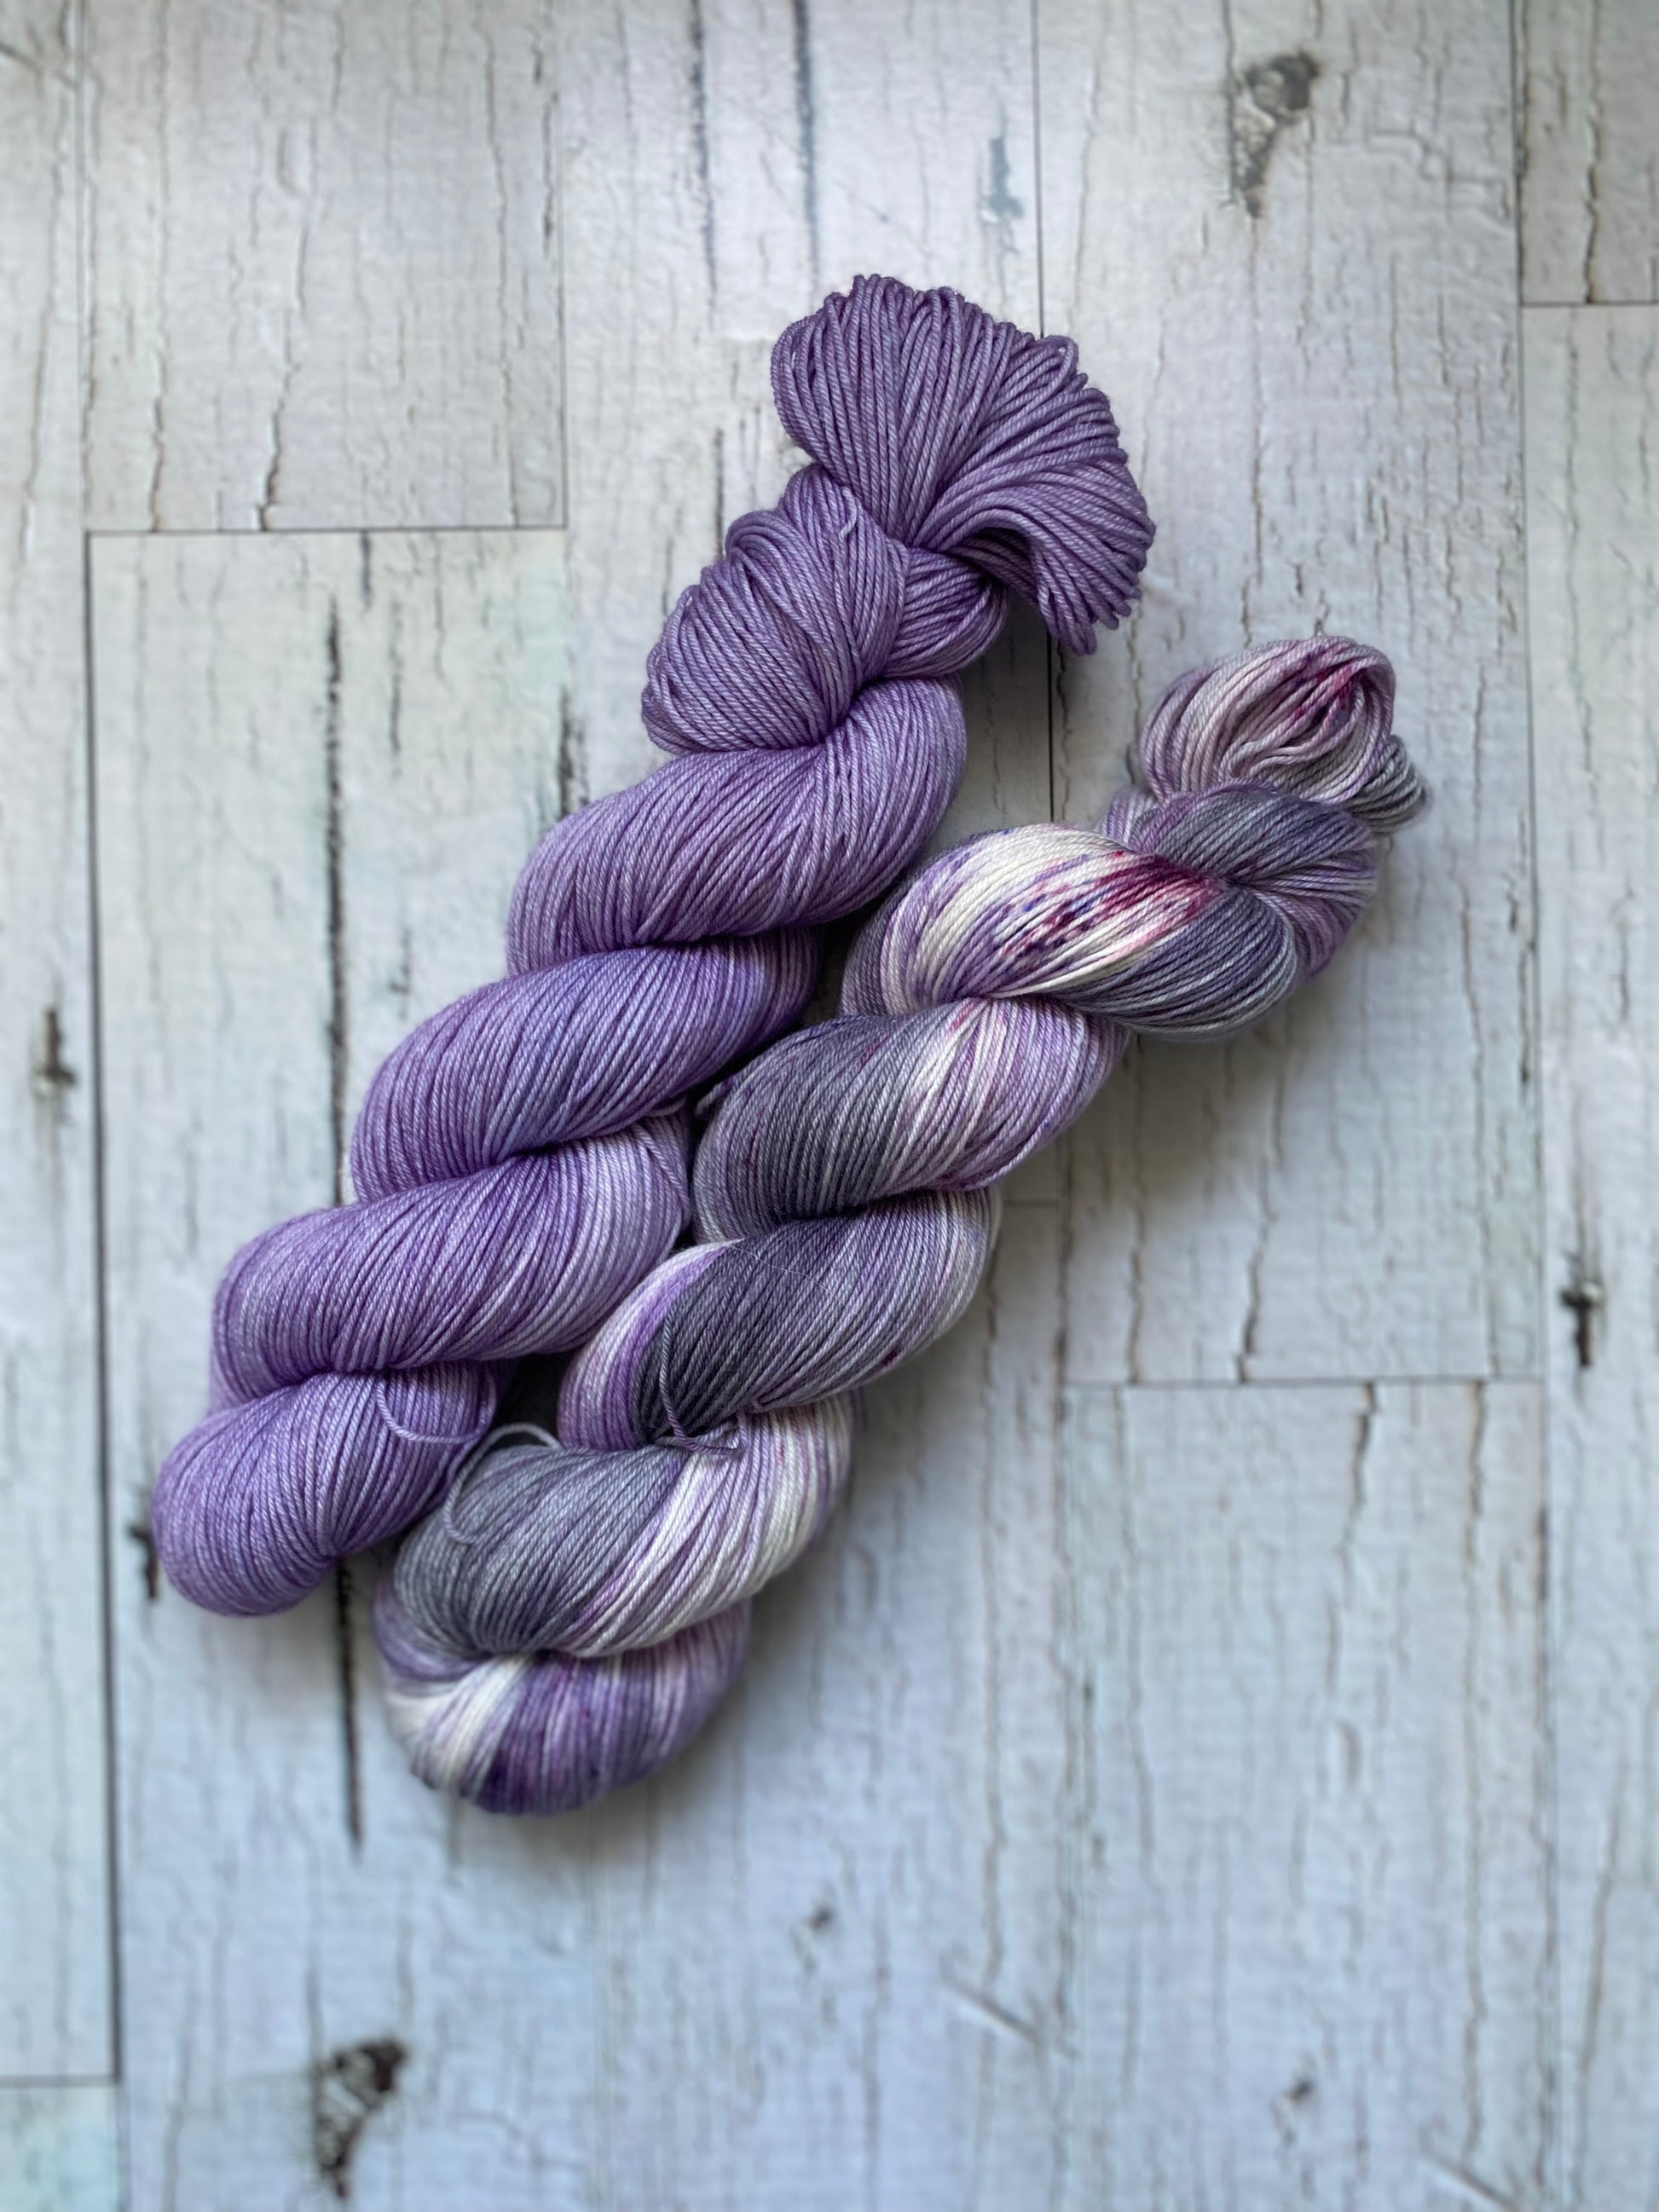 Two Skeins of Everyday Fingeringing, Wildflower on the left and Lilac Storm on the Right.